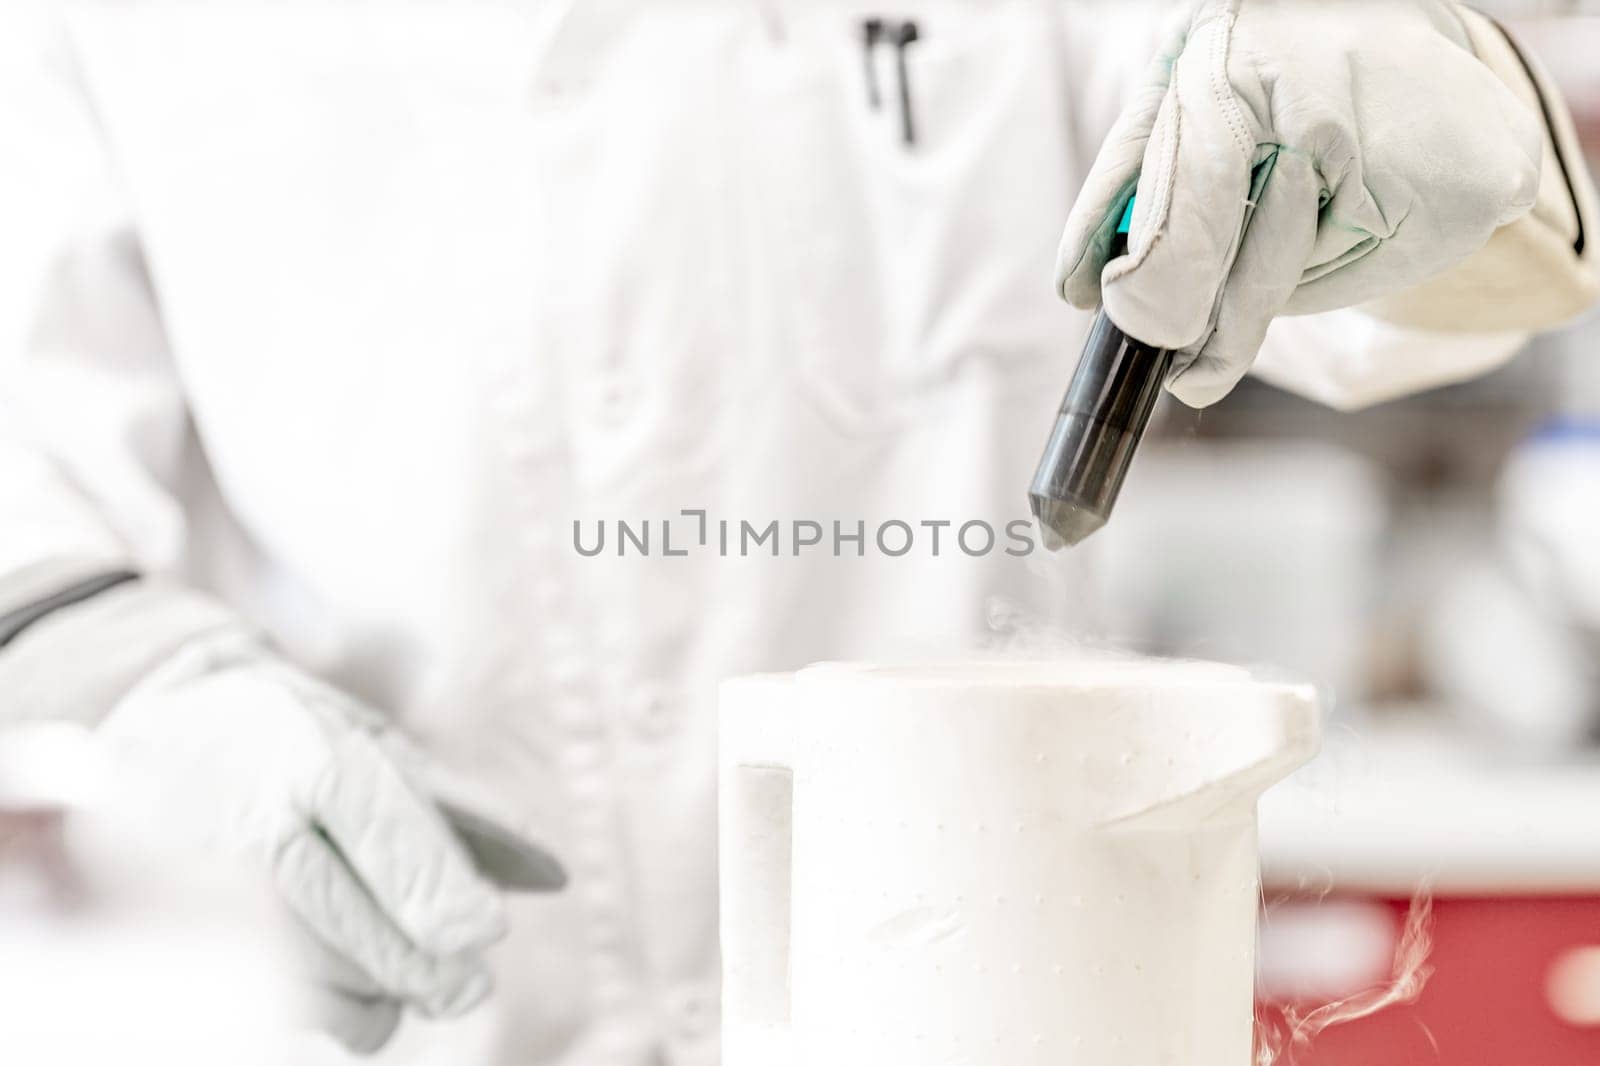 scientific experiments with liquid nitrogen in a research laboratory by Edophoto